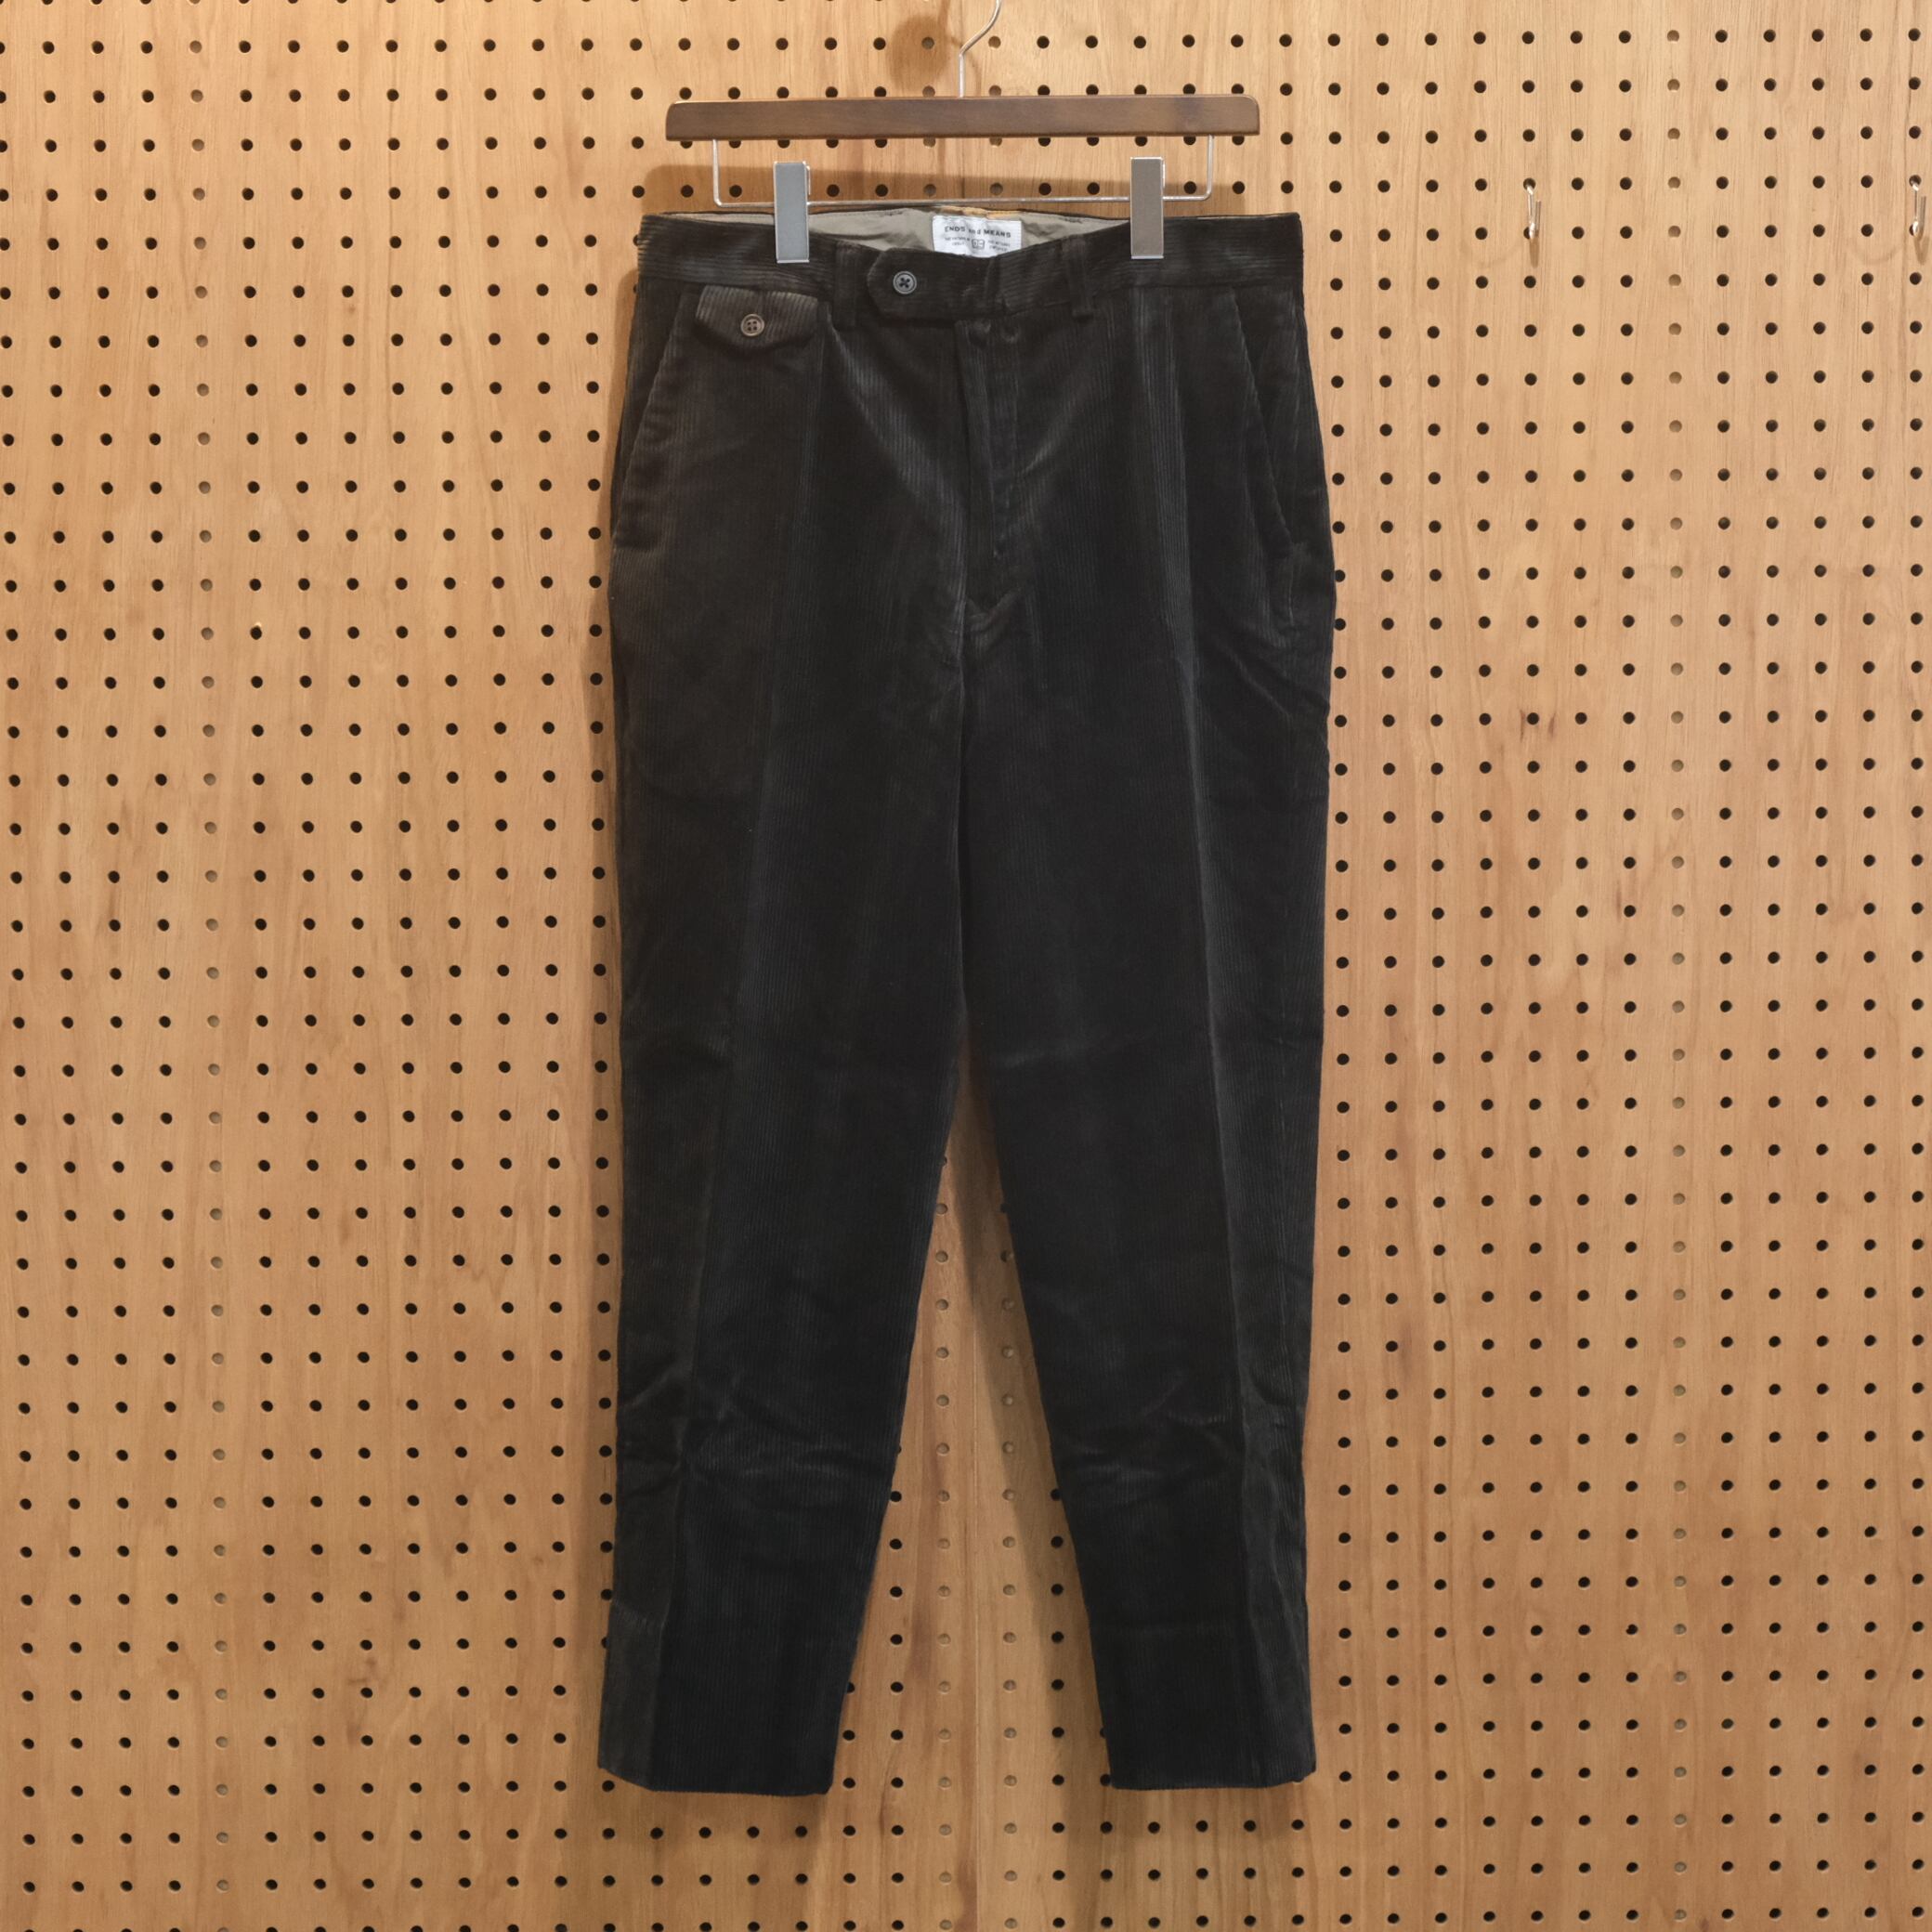 ENDS and MEANS（エンズ アンド ミーンズ）Grandpa Cord Trousers -Black- #EM-ST-P04 |  roamers and seekers